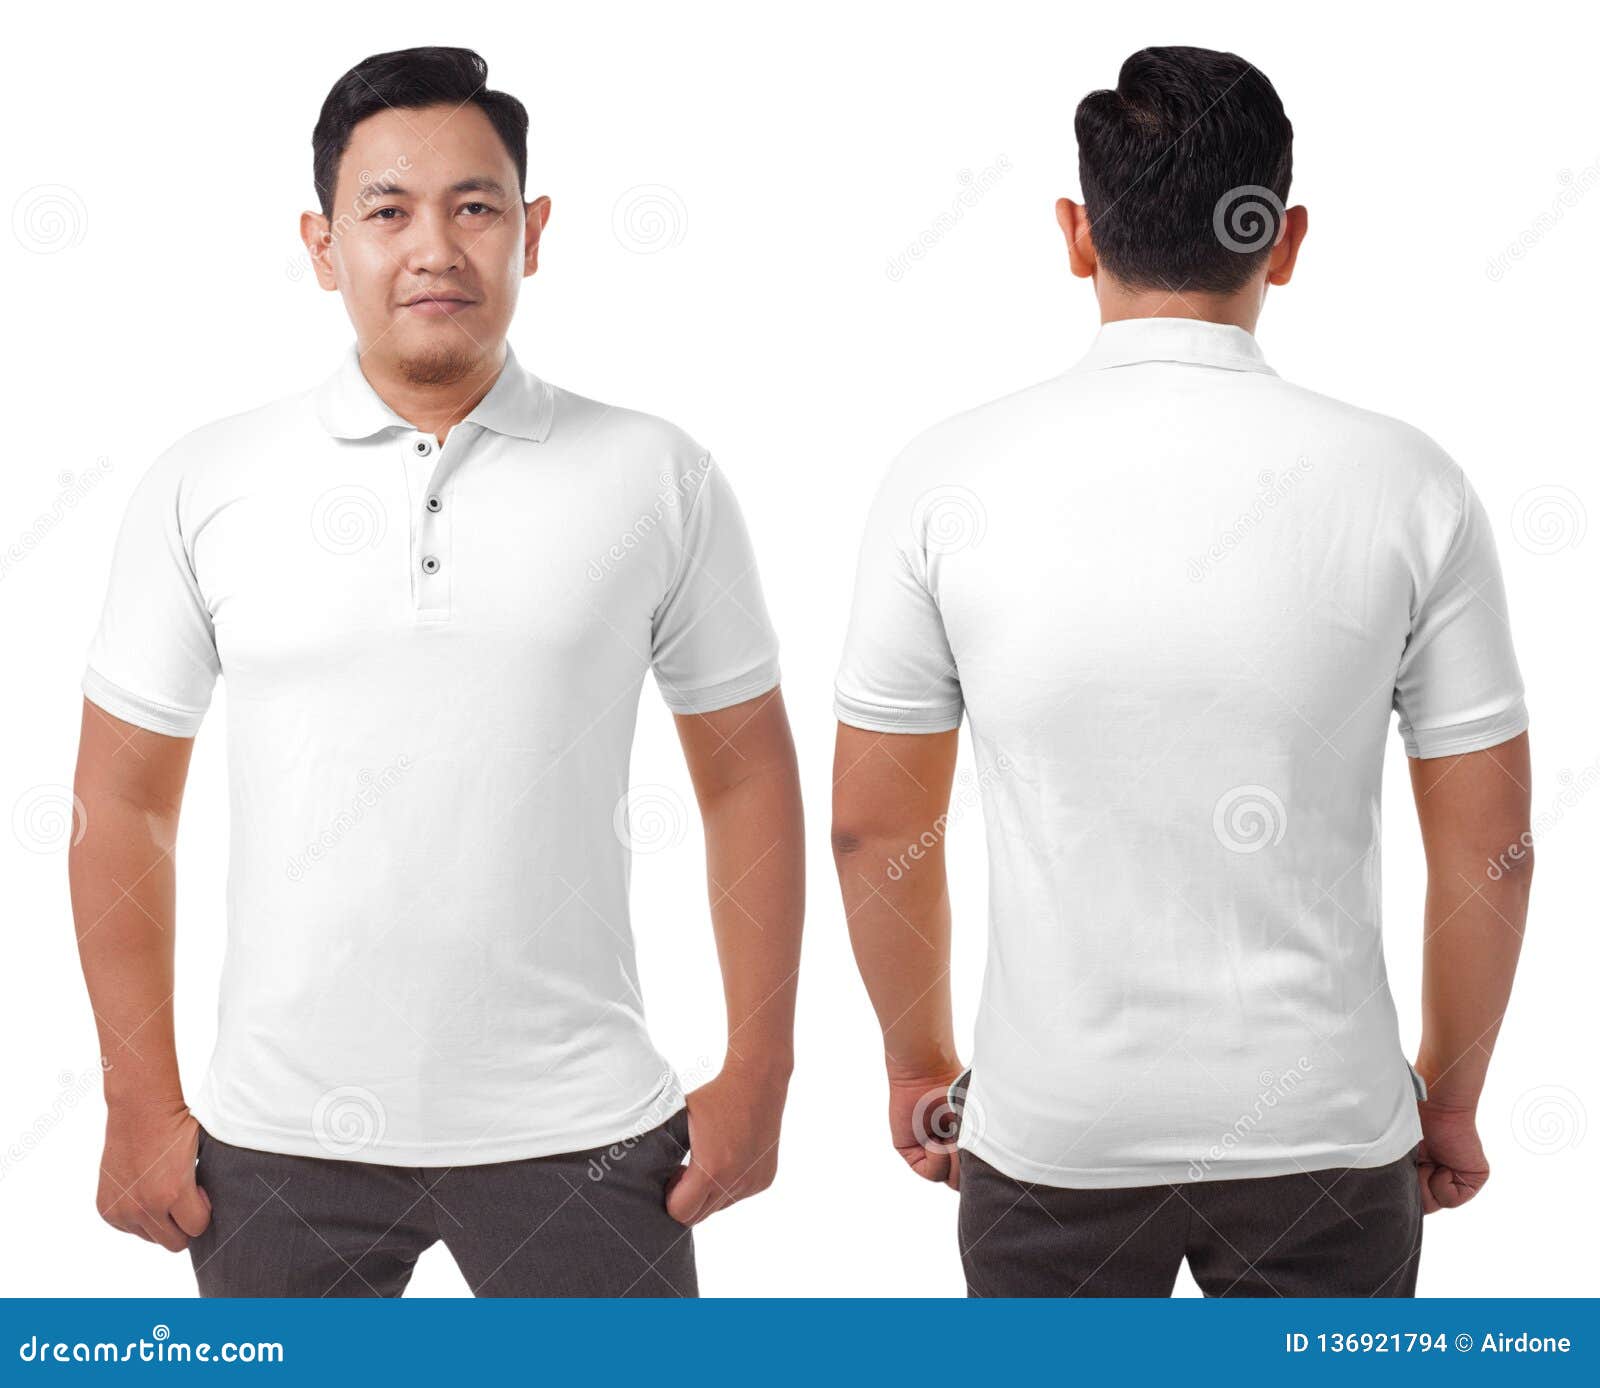 White Collared Shirt Design Template Stock Photo - Image of polo ...